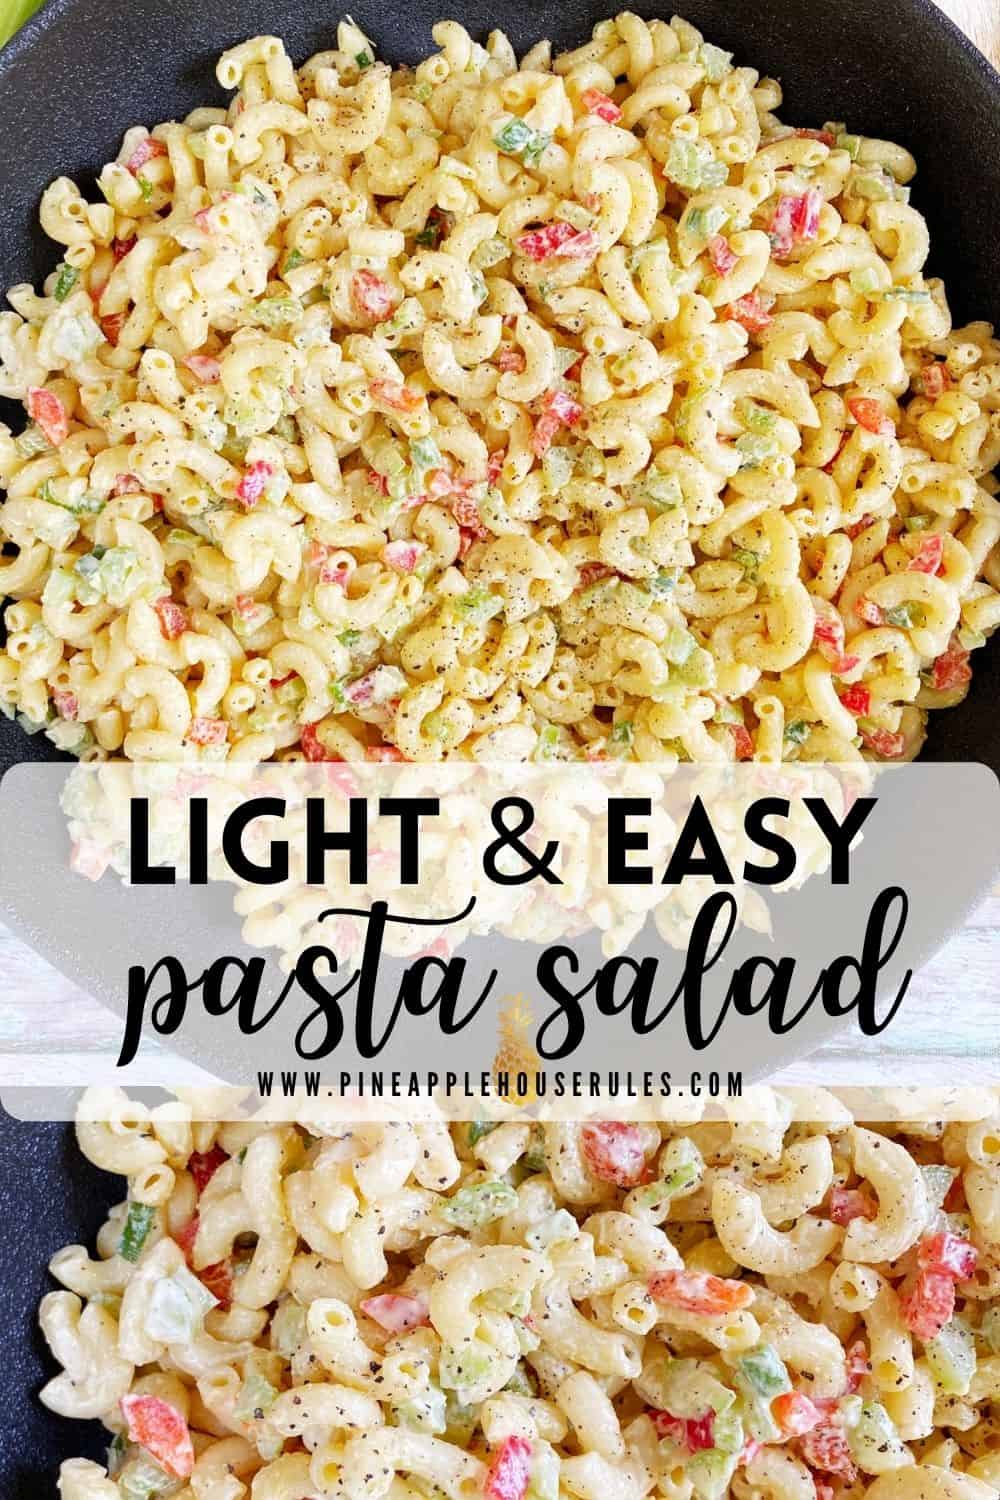 This Easy Pasta Salad is the perfect side dish for any pot luck or barbecue. With the perfect balance of mayonnaise and seasoning, it's delicious and light! The best part is it can be made ahead of time and stored in the fridge! Pasta Salad Recipes | Pasta Salad Recipes Cold | Pasta Salad Recipes with Mayo | Pasta Salads Cold | Pasta Salad Recipes Vegetarian | Barbecue Side Dishes | Easy Recipes for Beginners | Easy Recipes | Barbecue Recipes | Easy Recipes for Kids | Side Dishes | Side Dish